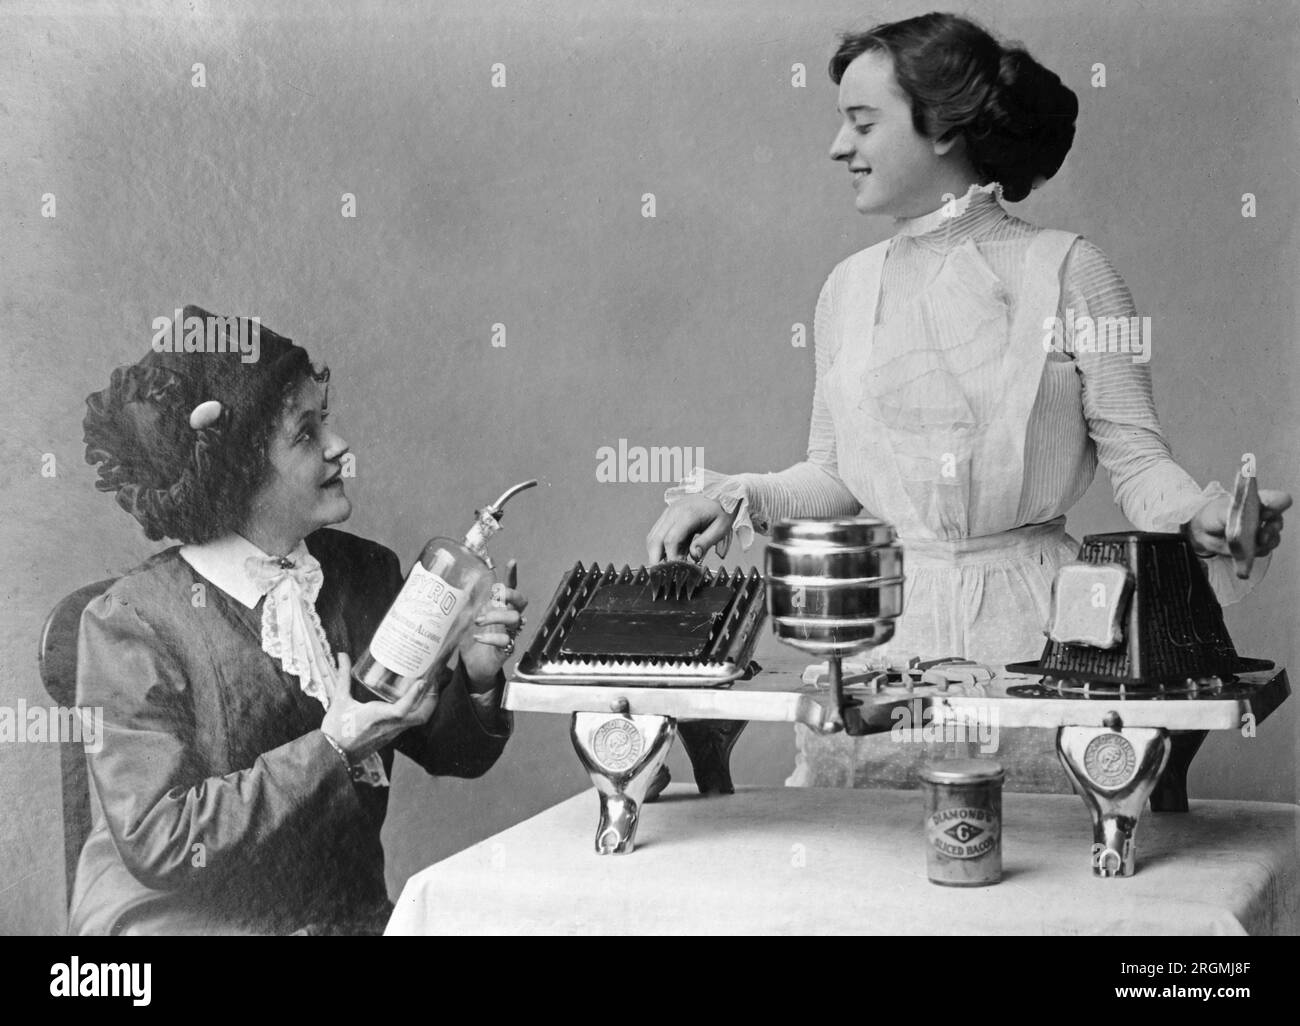 Photo shows a seated woman in a dress and hat holding a glass bottle with a pouring spout labeled 'Pyro' denatured alcohol. Another woman in a dress and apron stands behind a 3-burner appliance that can heat toast and other food ca. 1912-1930 Stock Photo